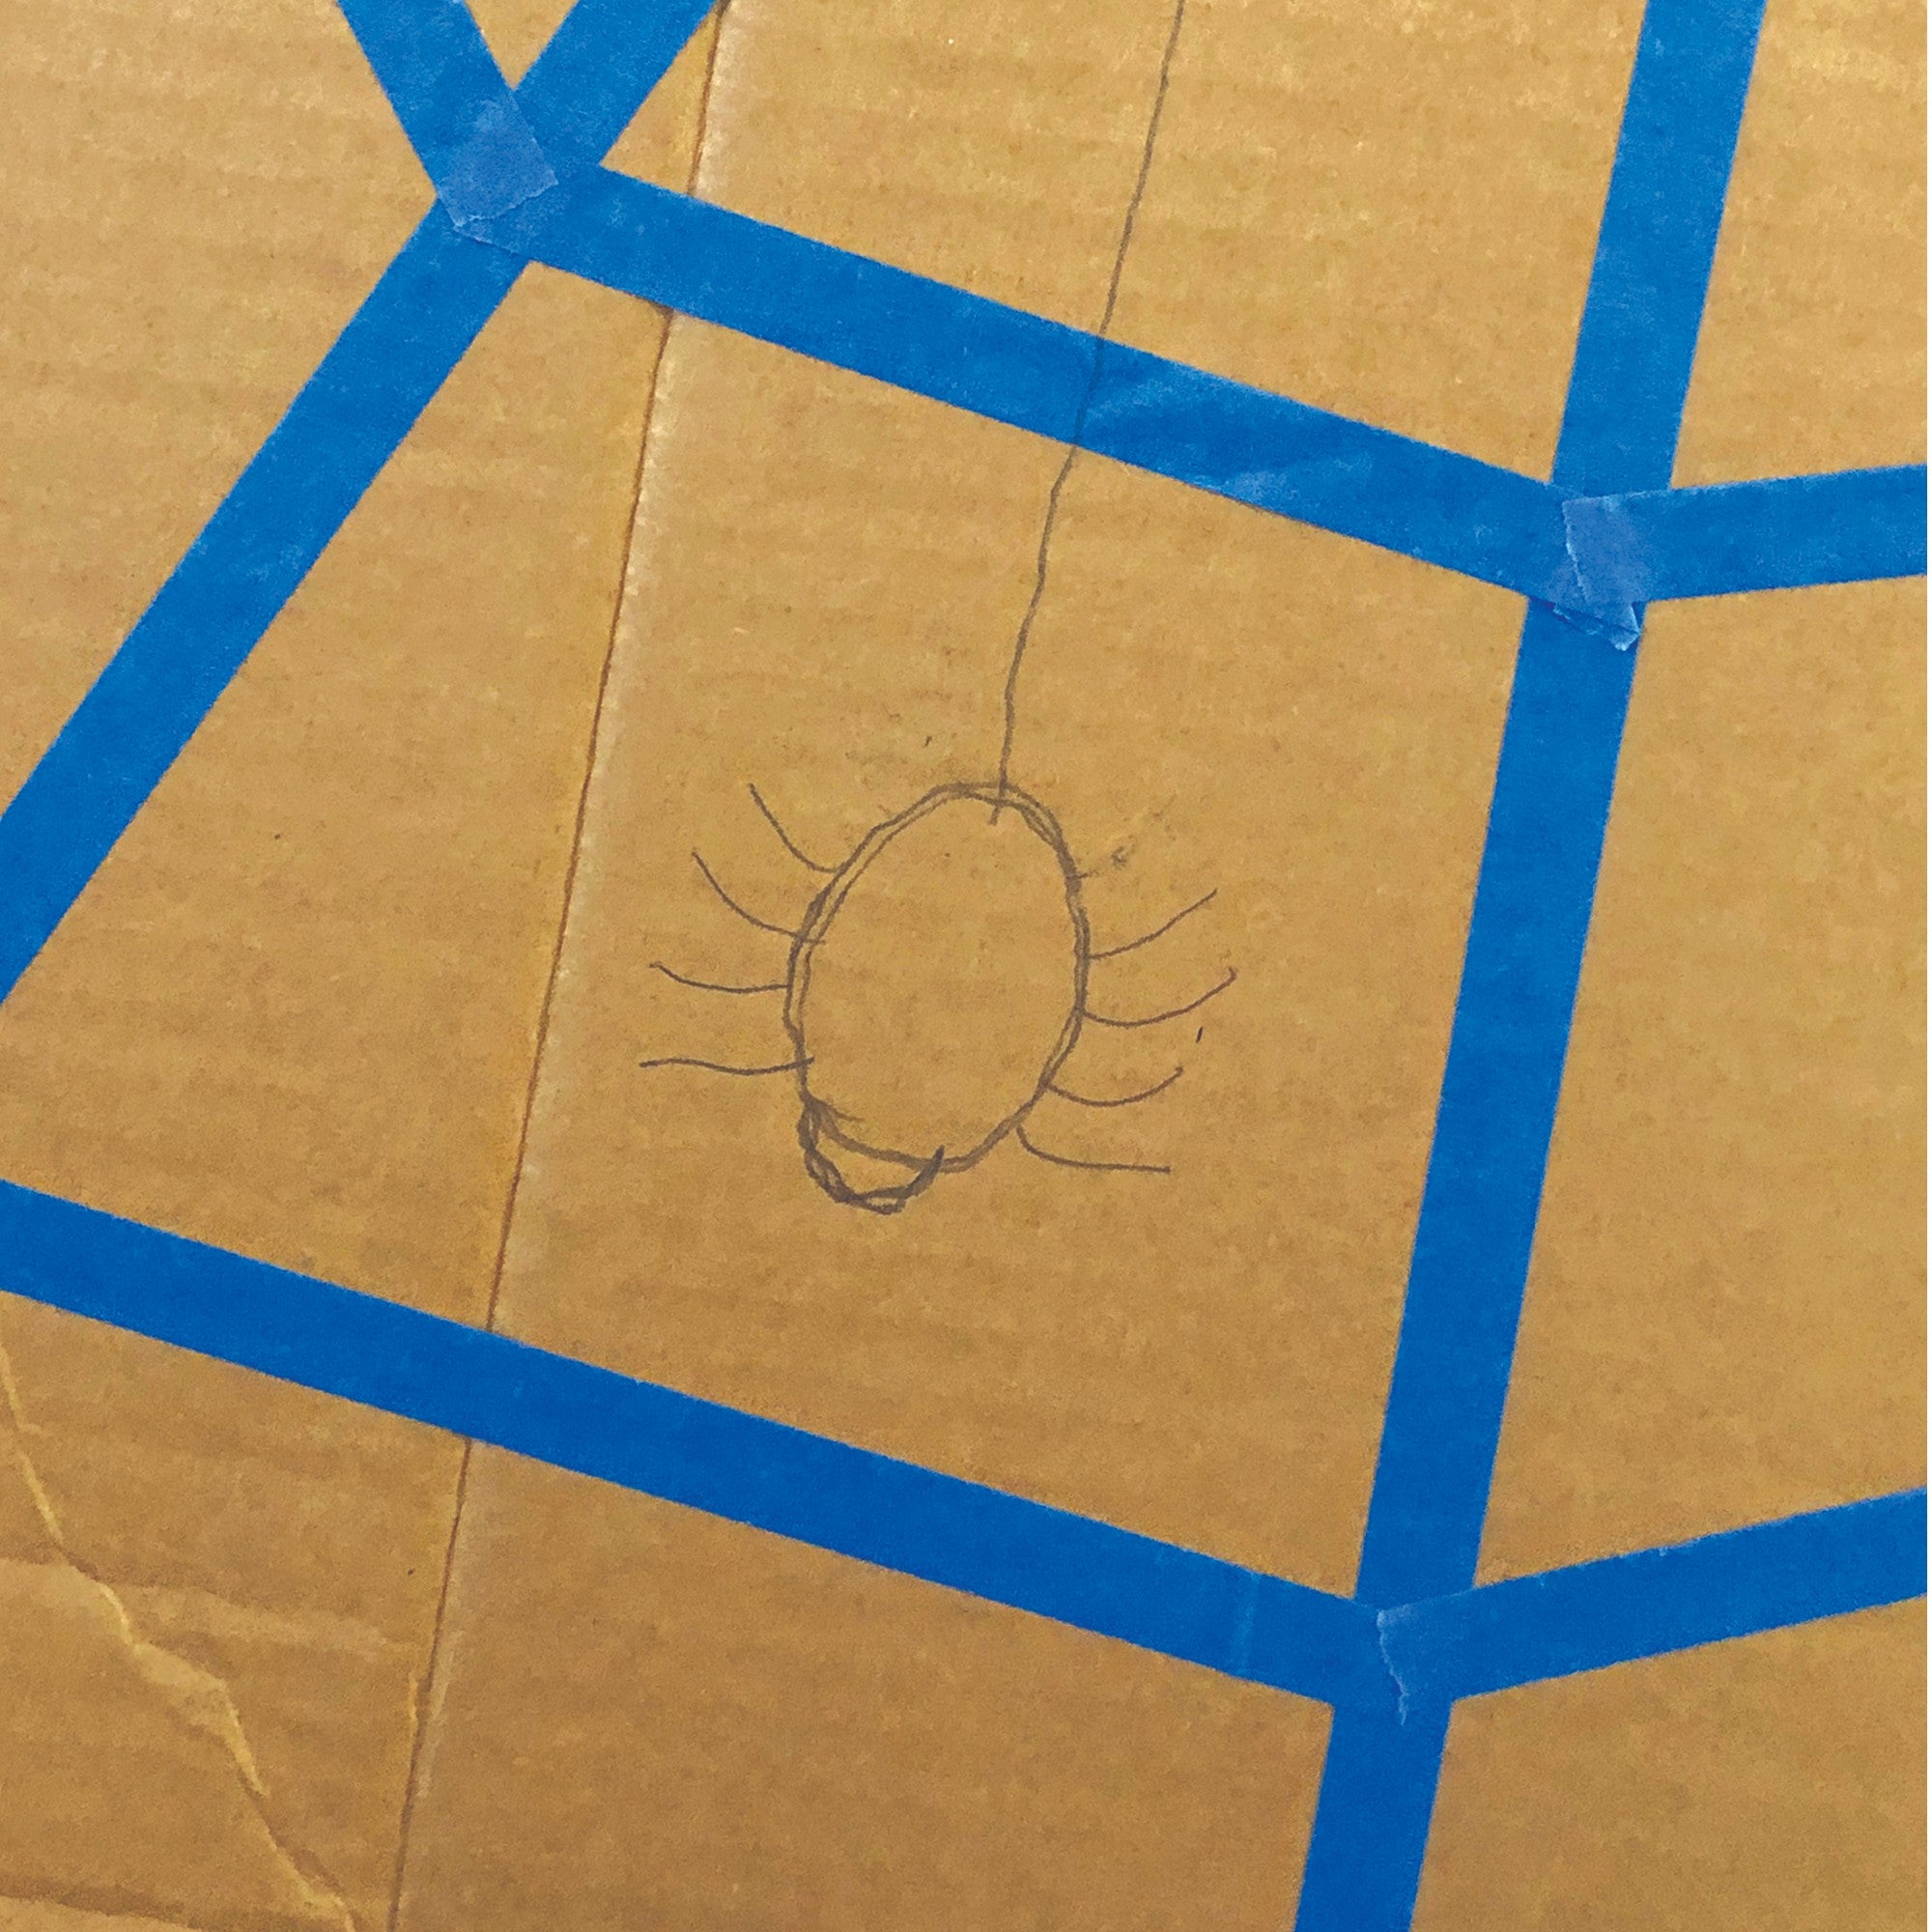 Pencil outline of spider on cardboard with blue painter's tape